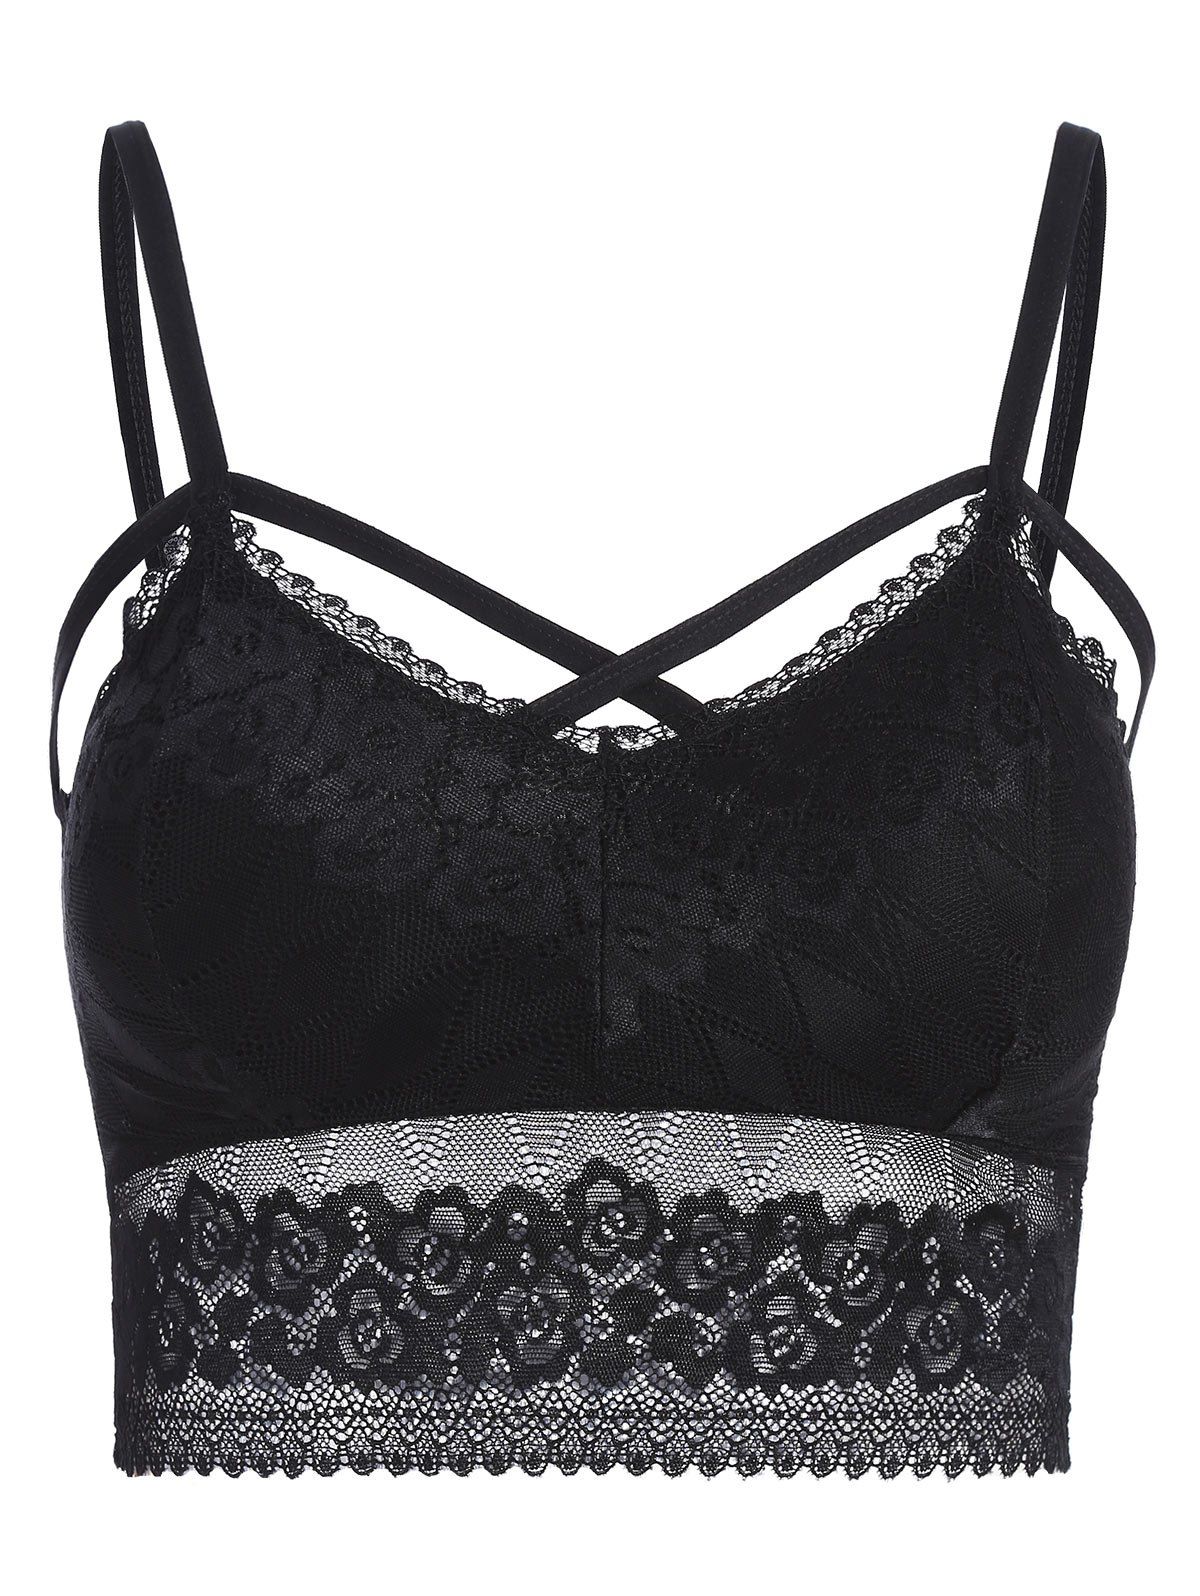 Padded Cross Front Lace Crop Cami Top - BLACK ONE SIZE